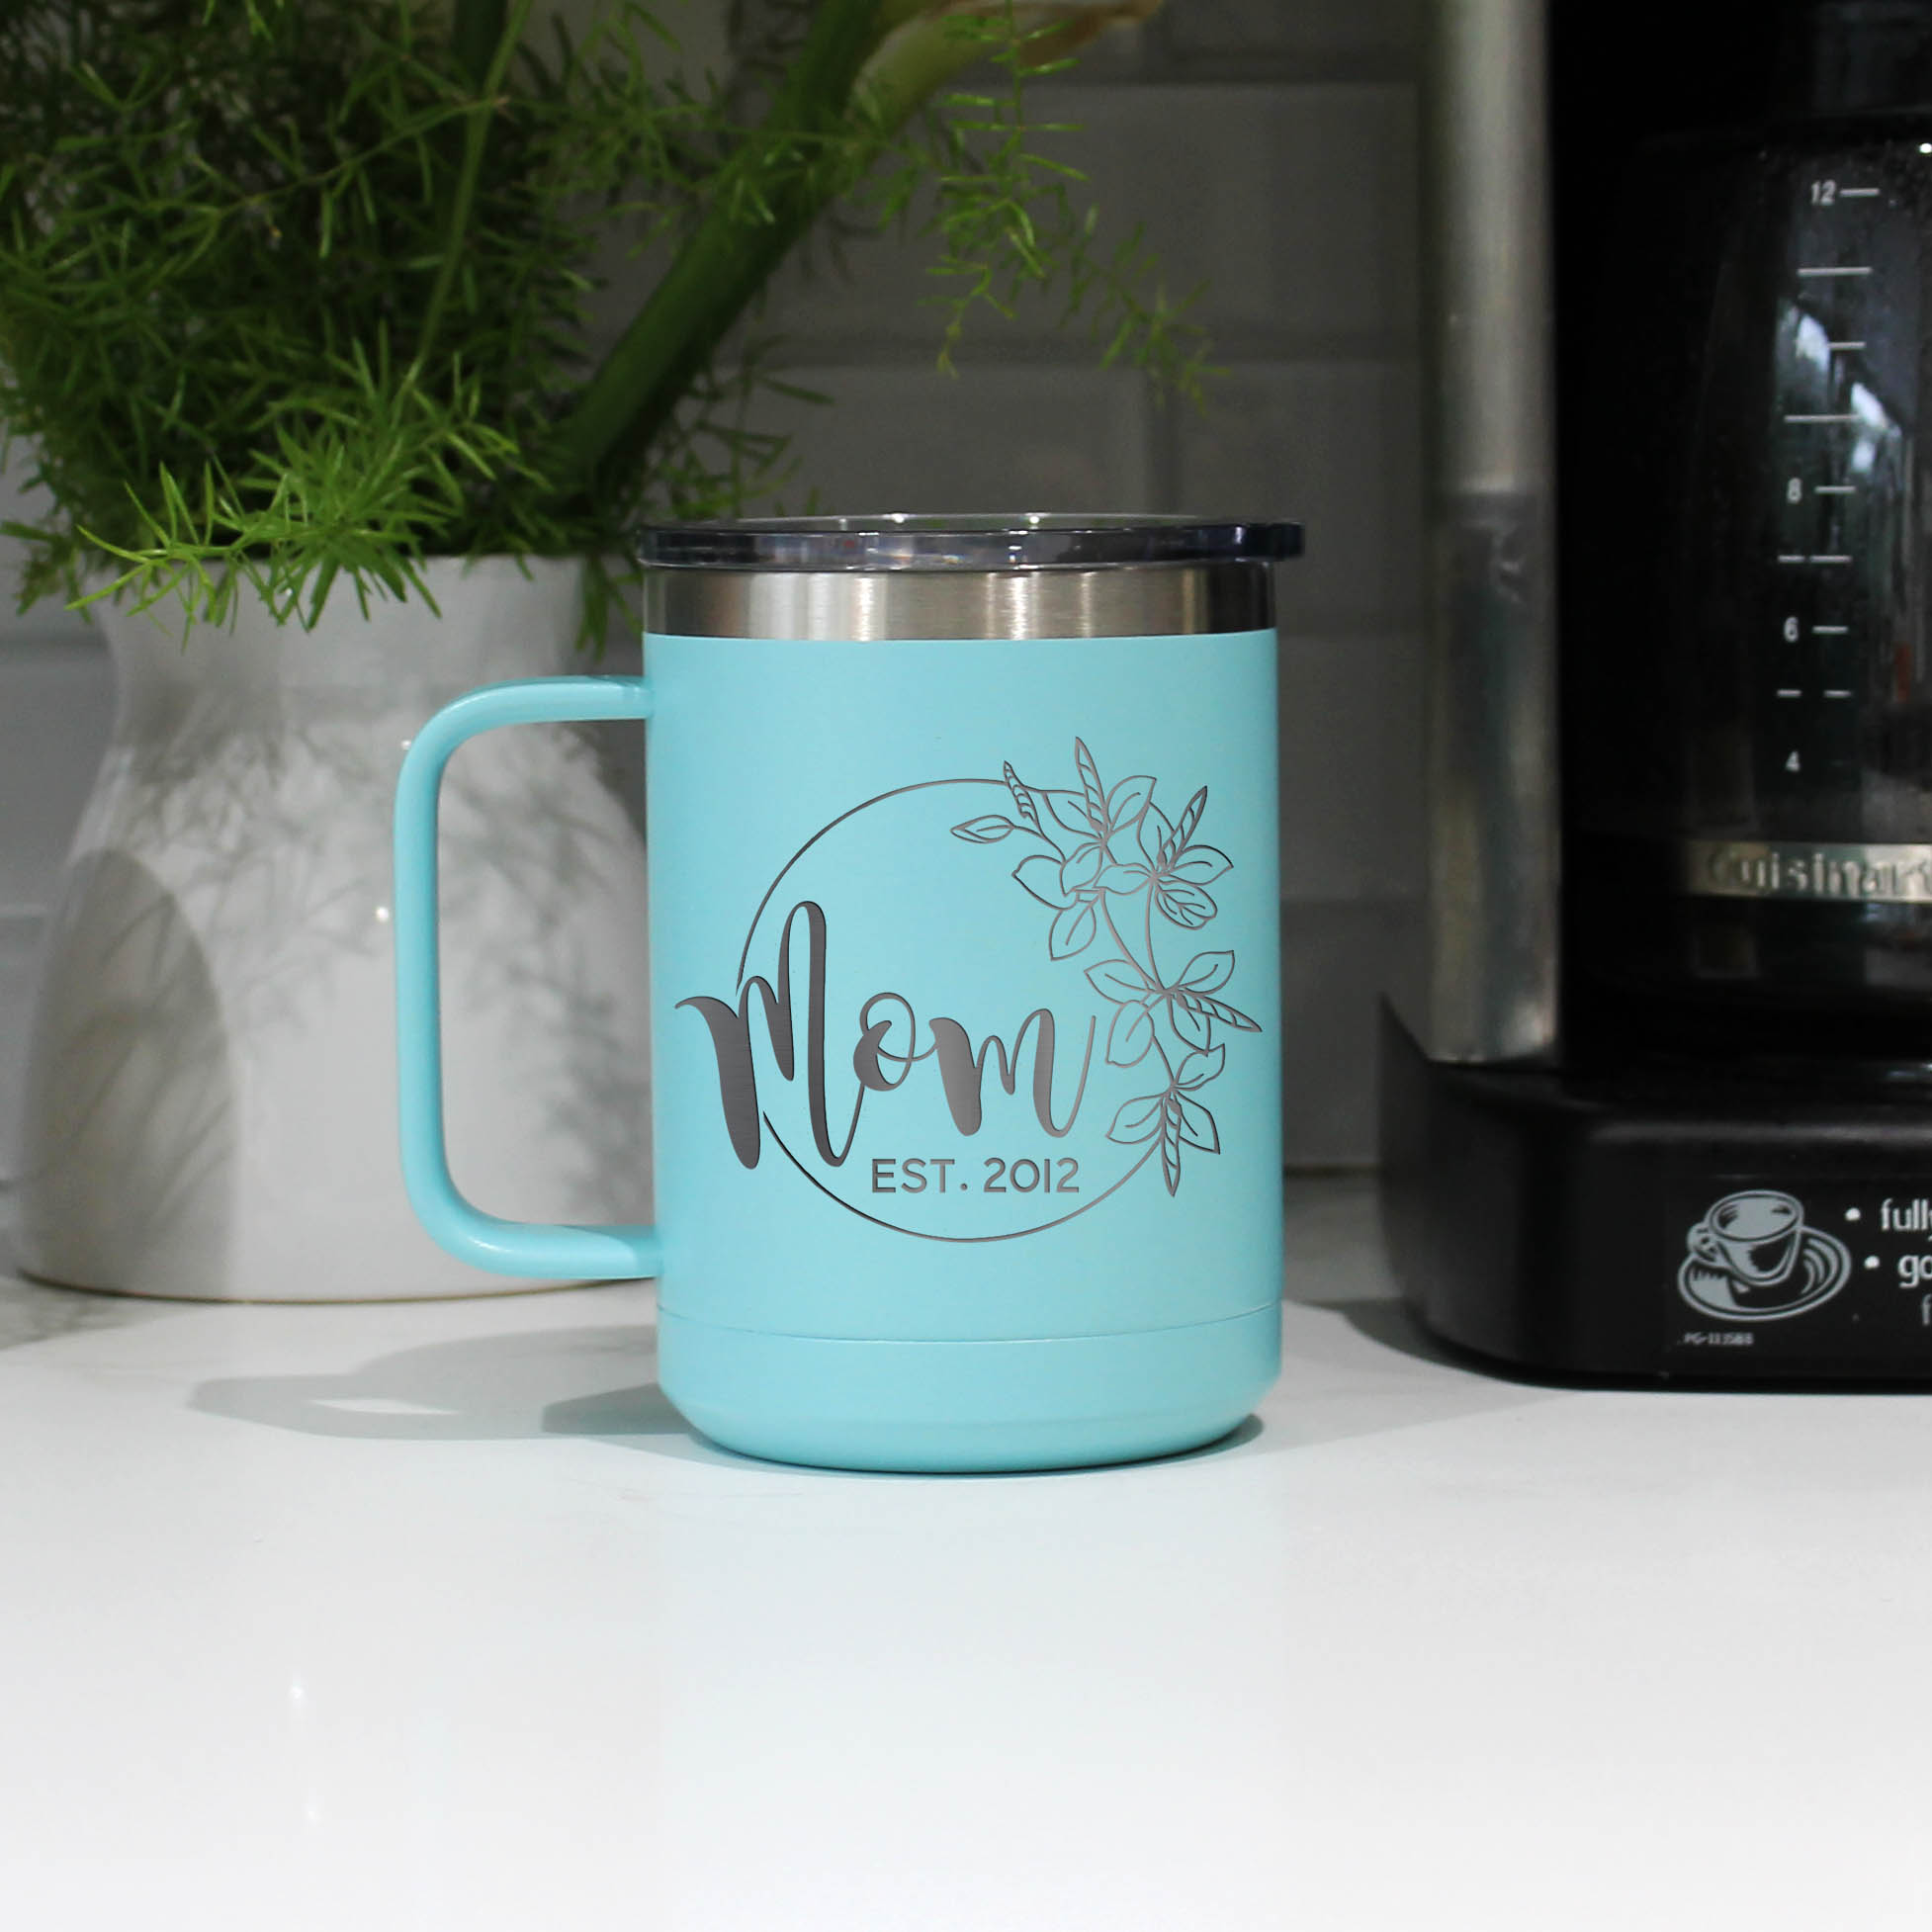 Personalized RTIC 12 oz Coffee Cup - Powder Coated